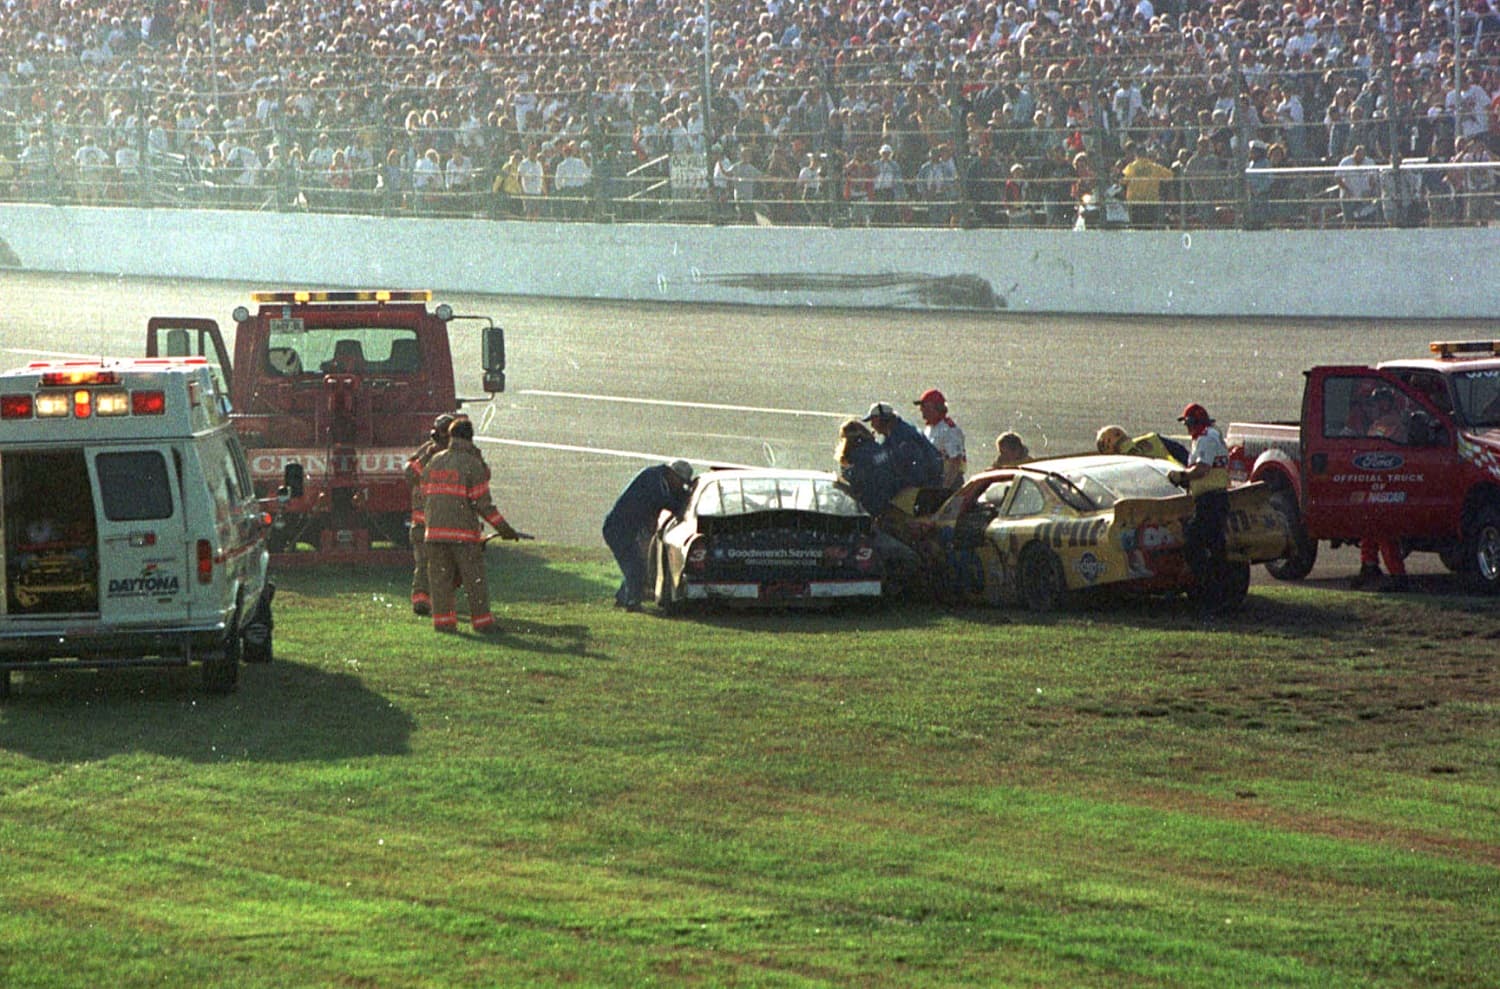 Emergency workers arrive at Dale Earnhardt's No. 3 Chevrolet after the crash on the final lap of the 43rd Daytona 500 on Feb. 18, 2001. | Marc Serota/Liaison via Getty Images